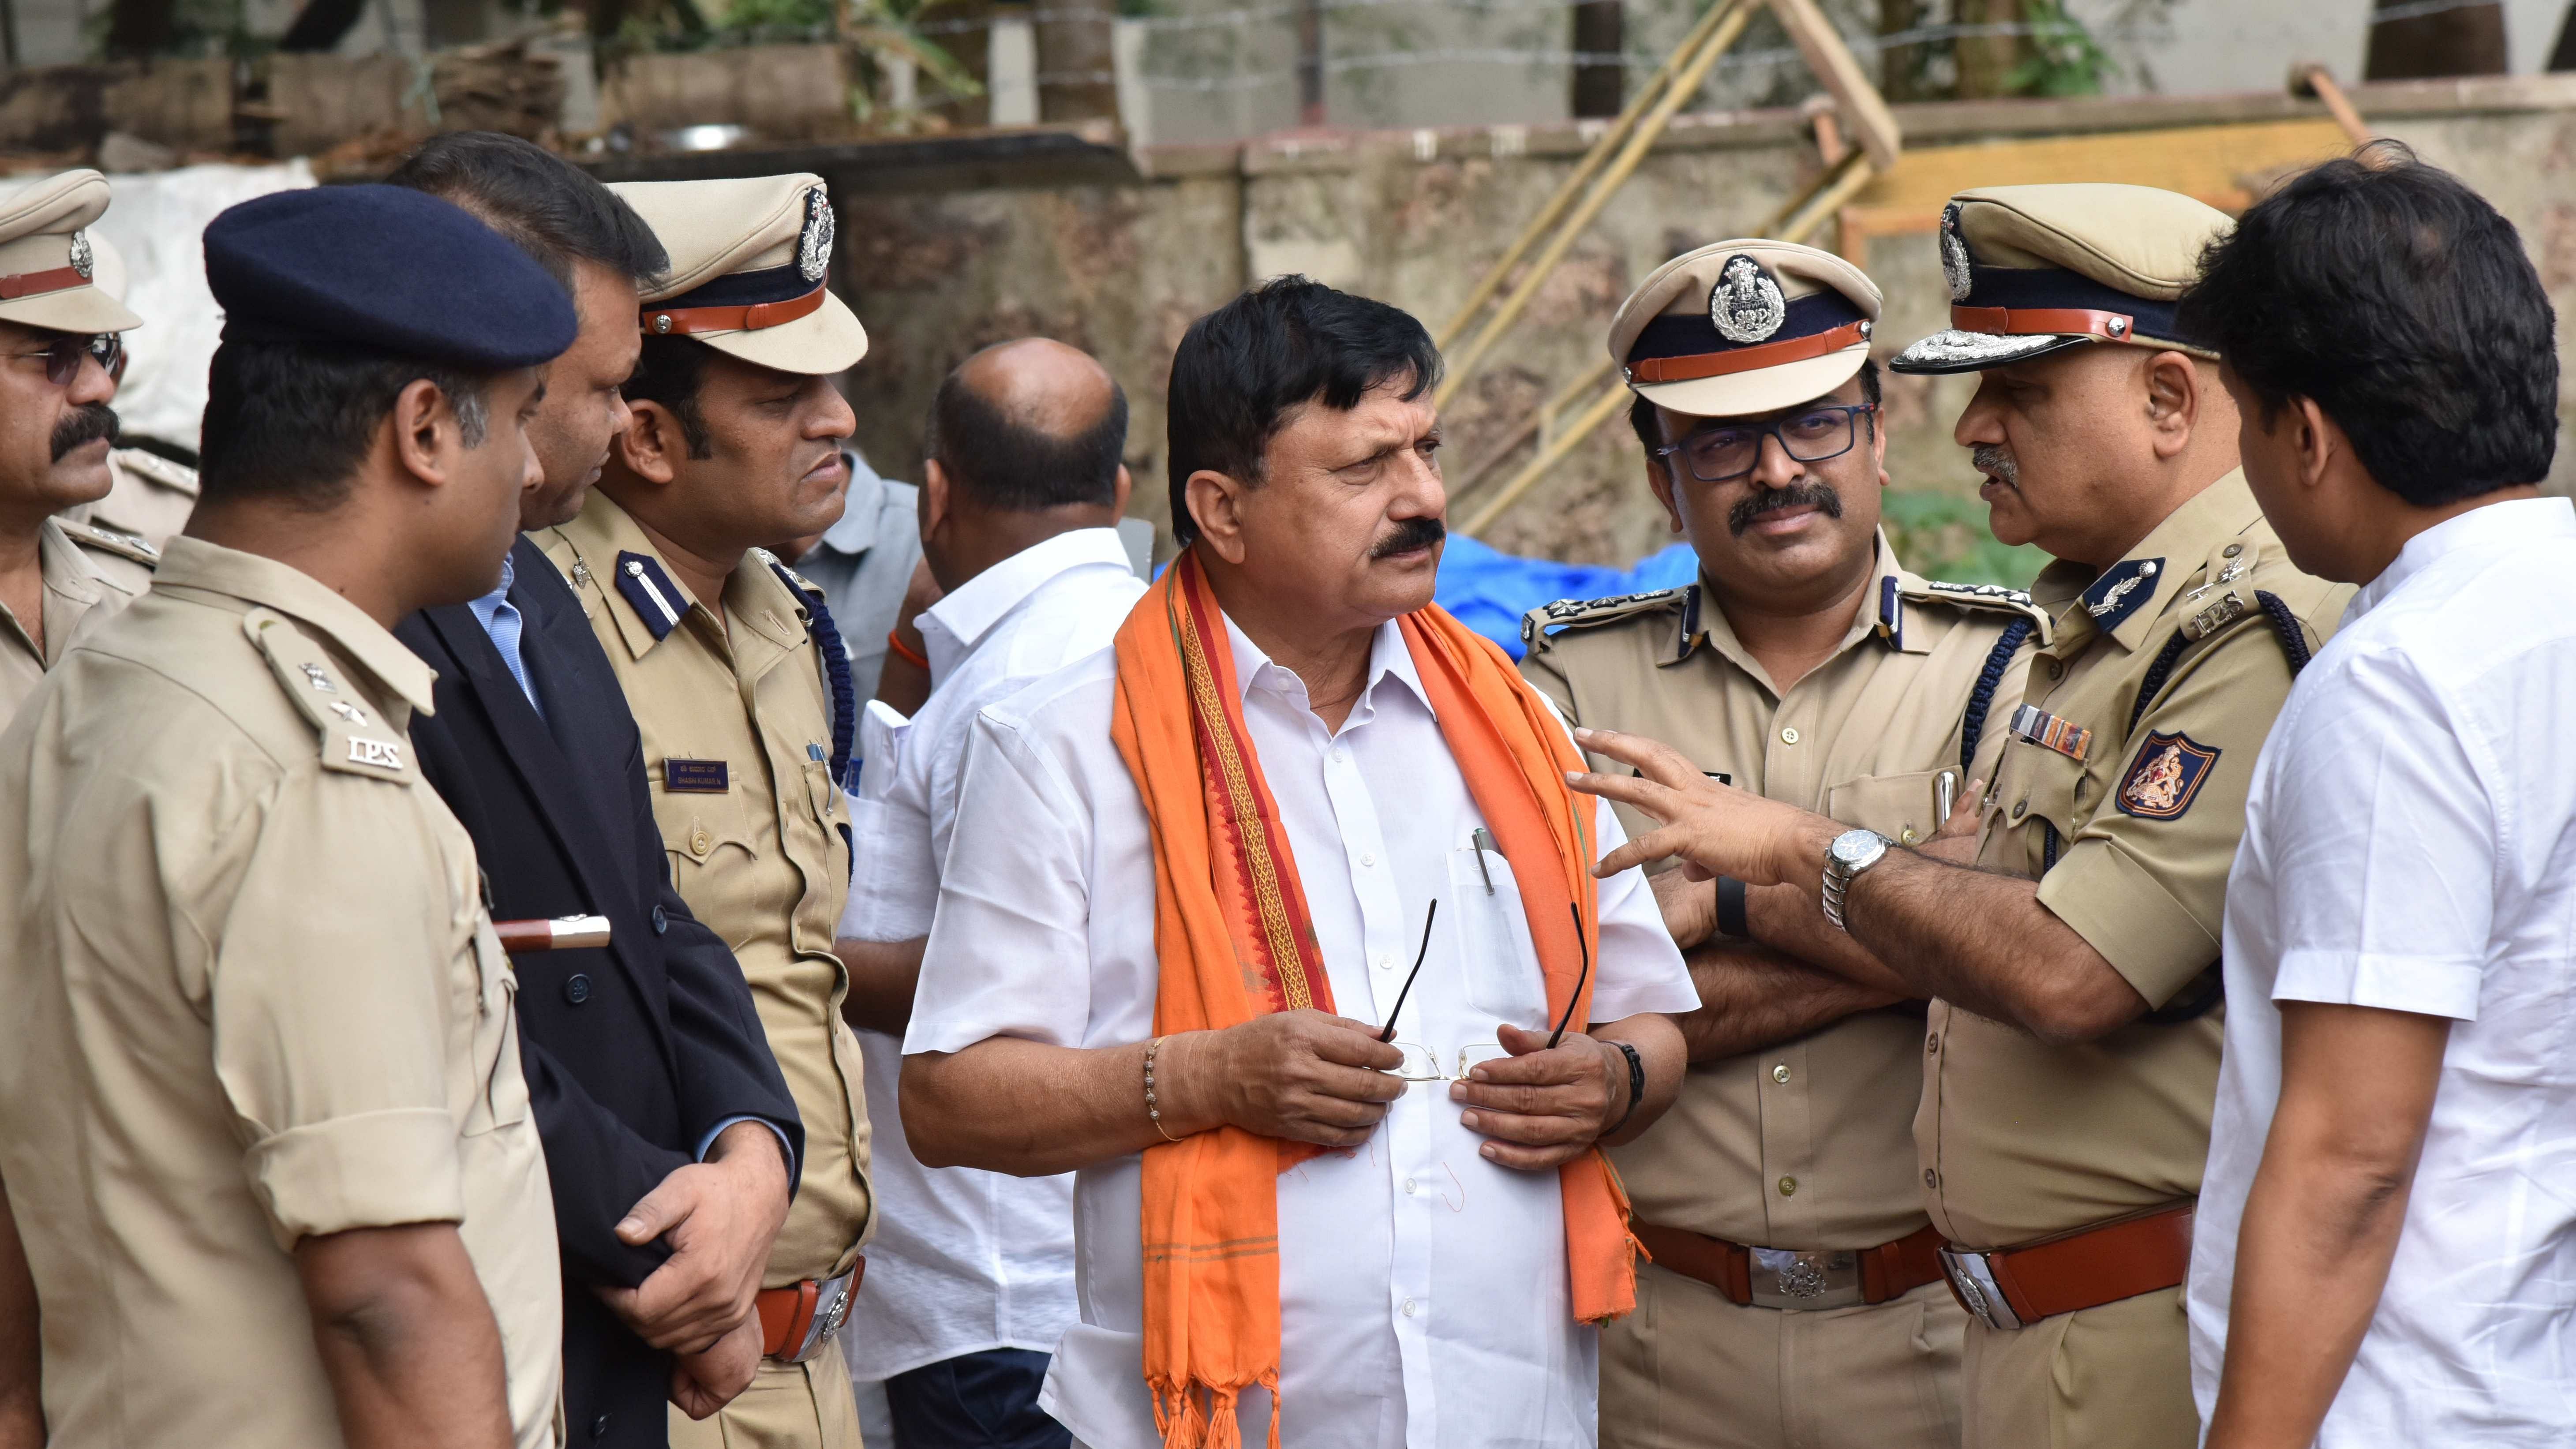 The Minister said that the NIA and other central agencies have been working with the Karnataka police in connection with the Mangaluru blast from day one. Credit: DH Photo